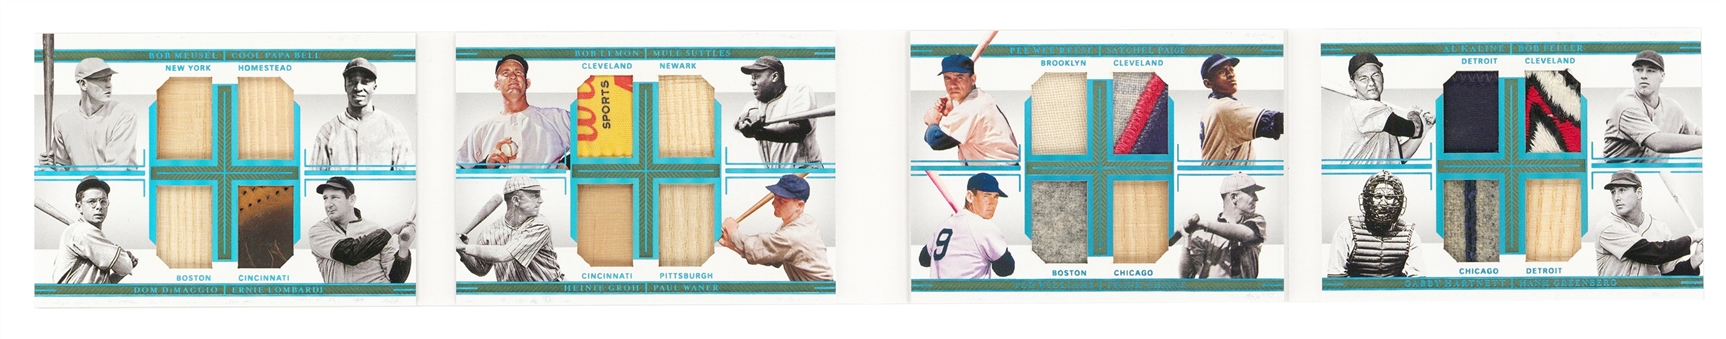 2020 Panini National Treasures #16P-LG 16 Player Materials Game Used Booklet Featuring (#1/1): Ted Williams, Pee Wee Reese, Al Kaline, Dom DiMaggio, Satchel Paige